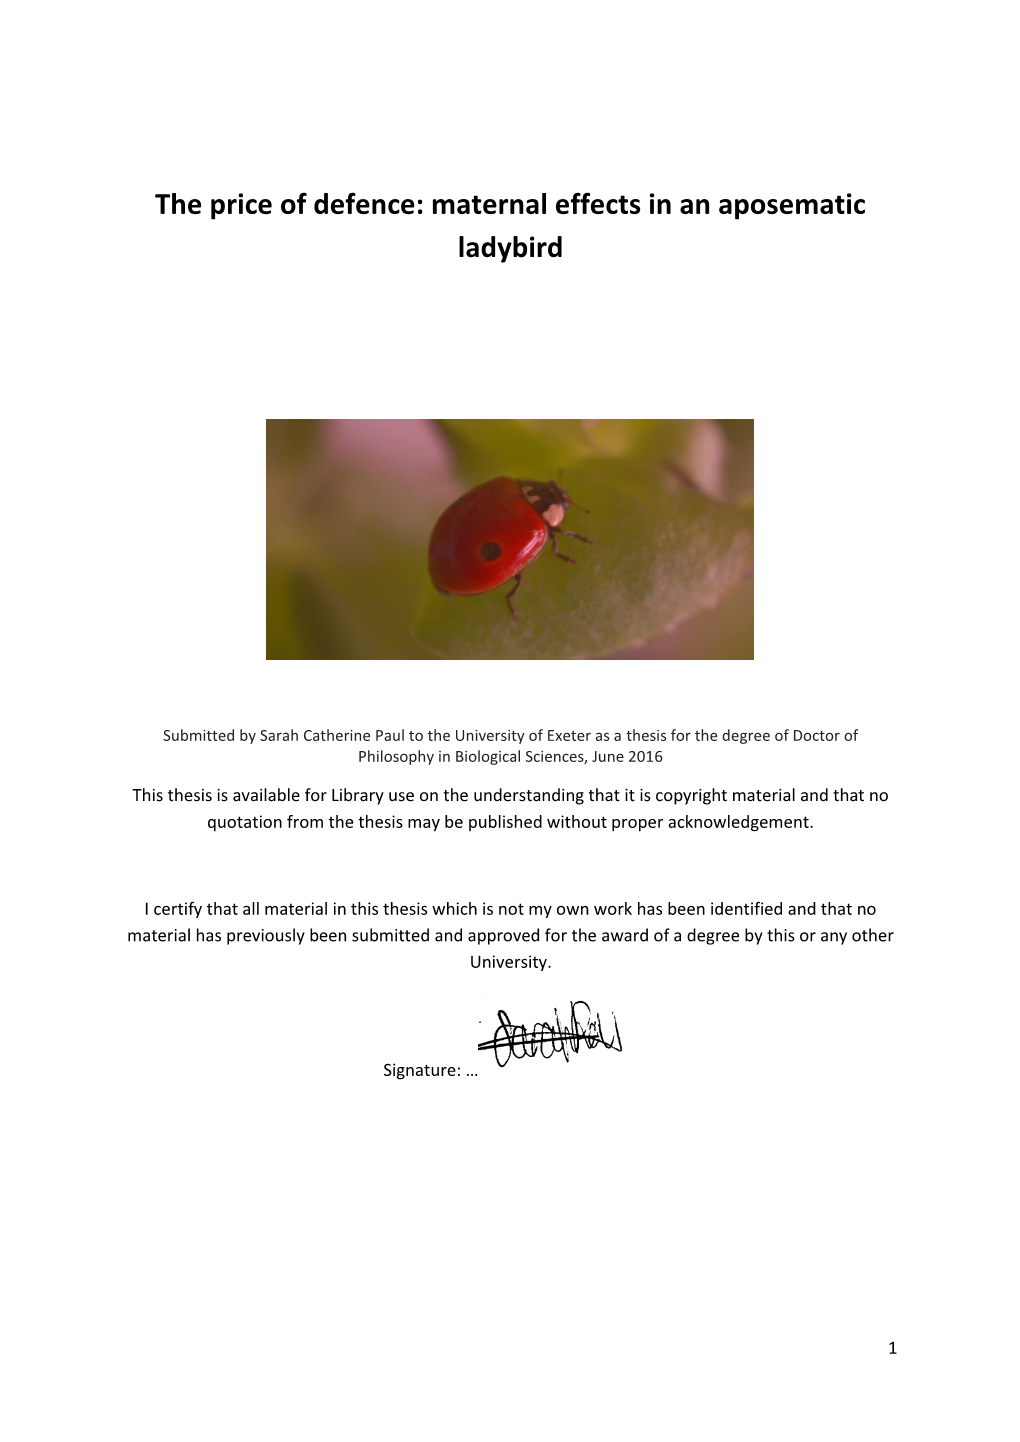 Maternal Effects in an Aposematic Ladybird